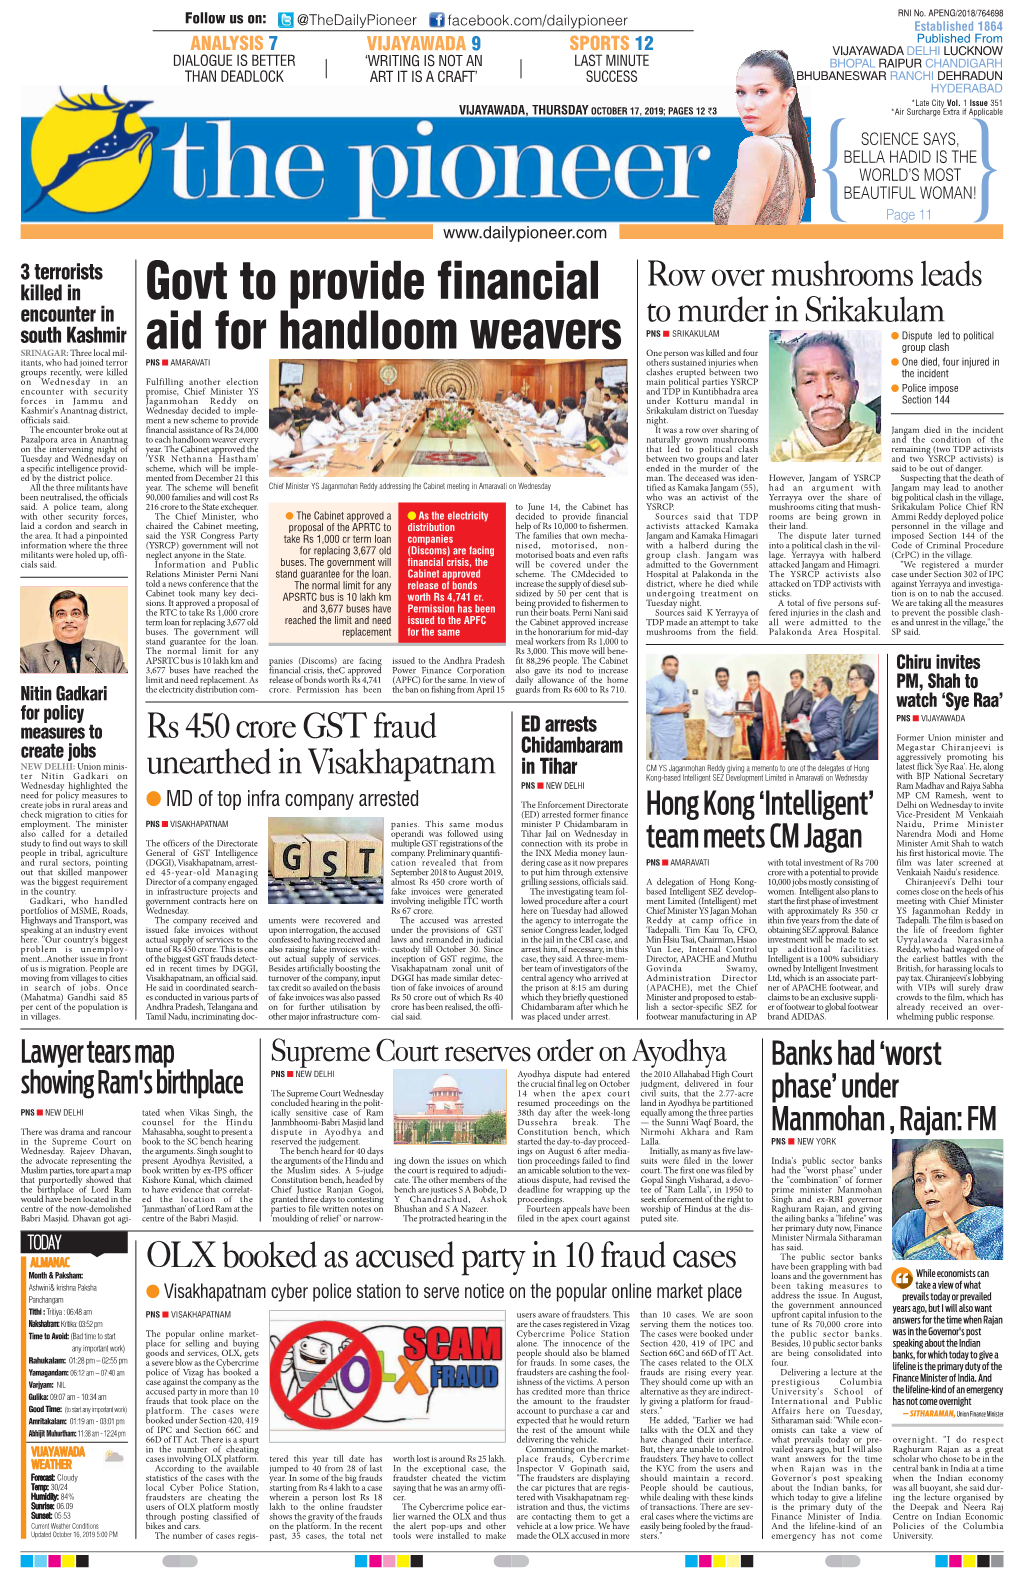 Govt to Provide Financial Aid for Handloom Weavers